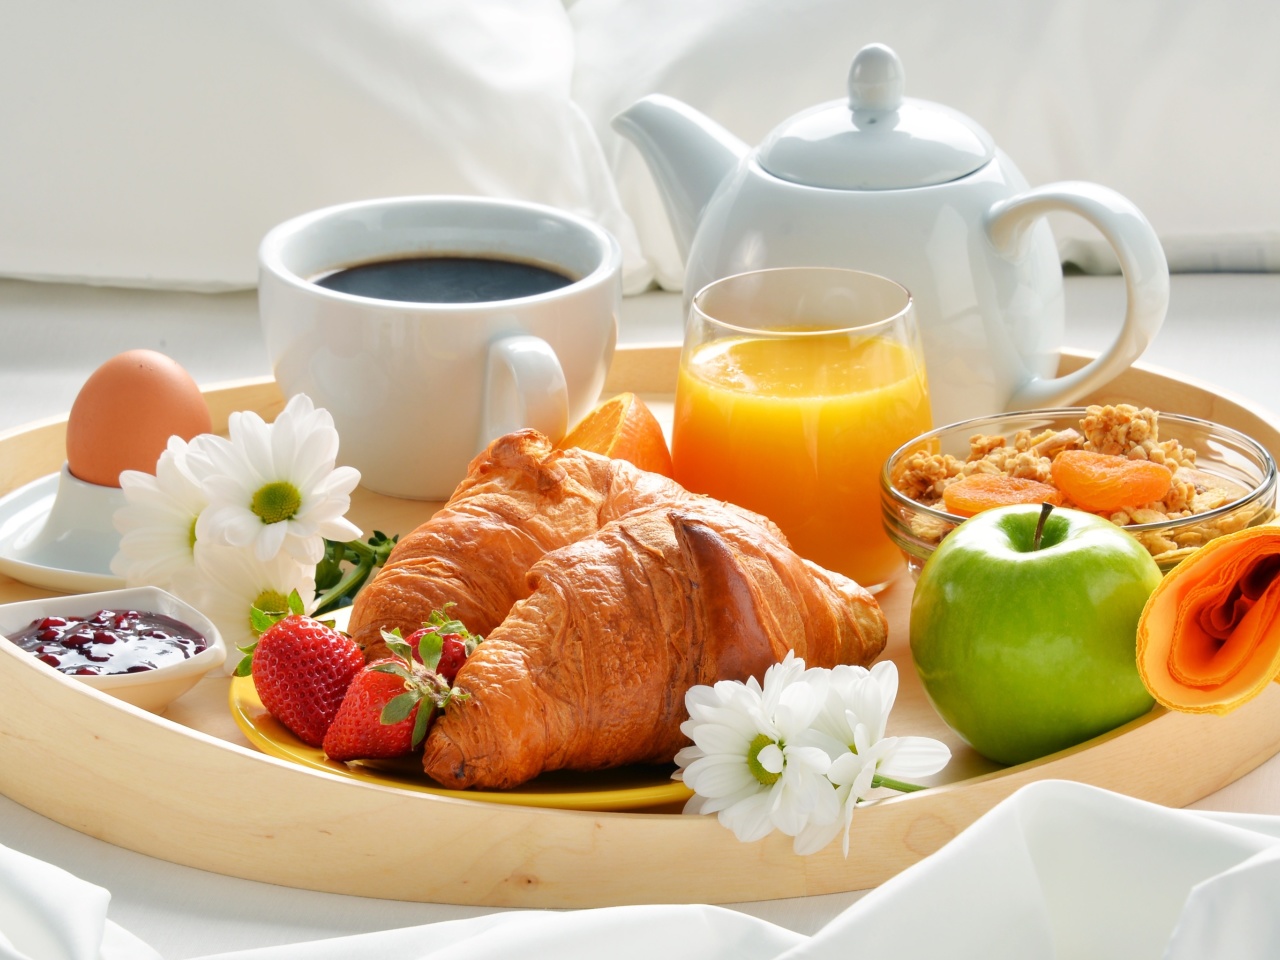 Breakfast with croissant and musli wallpaper 1280x960